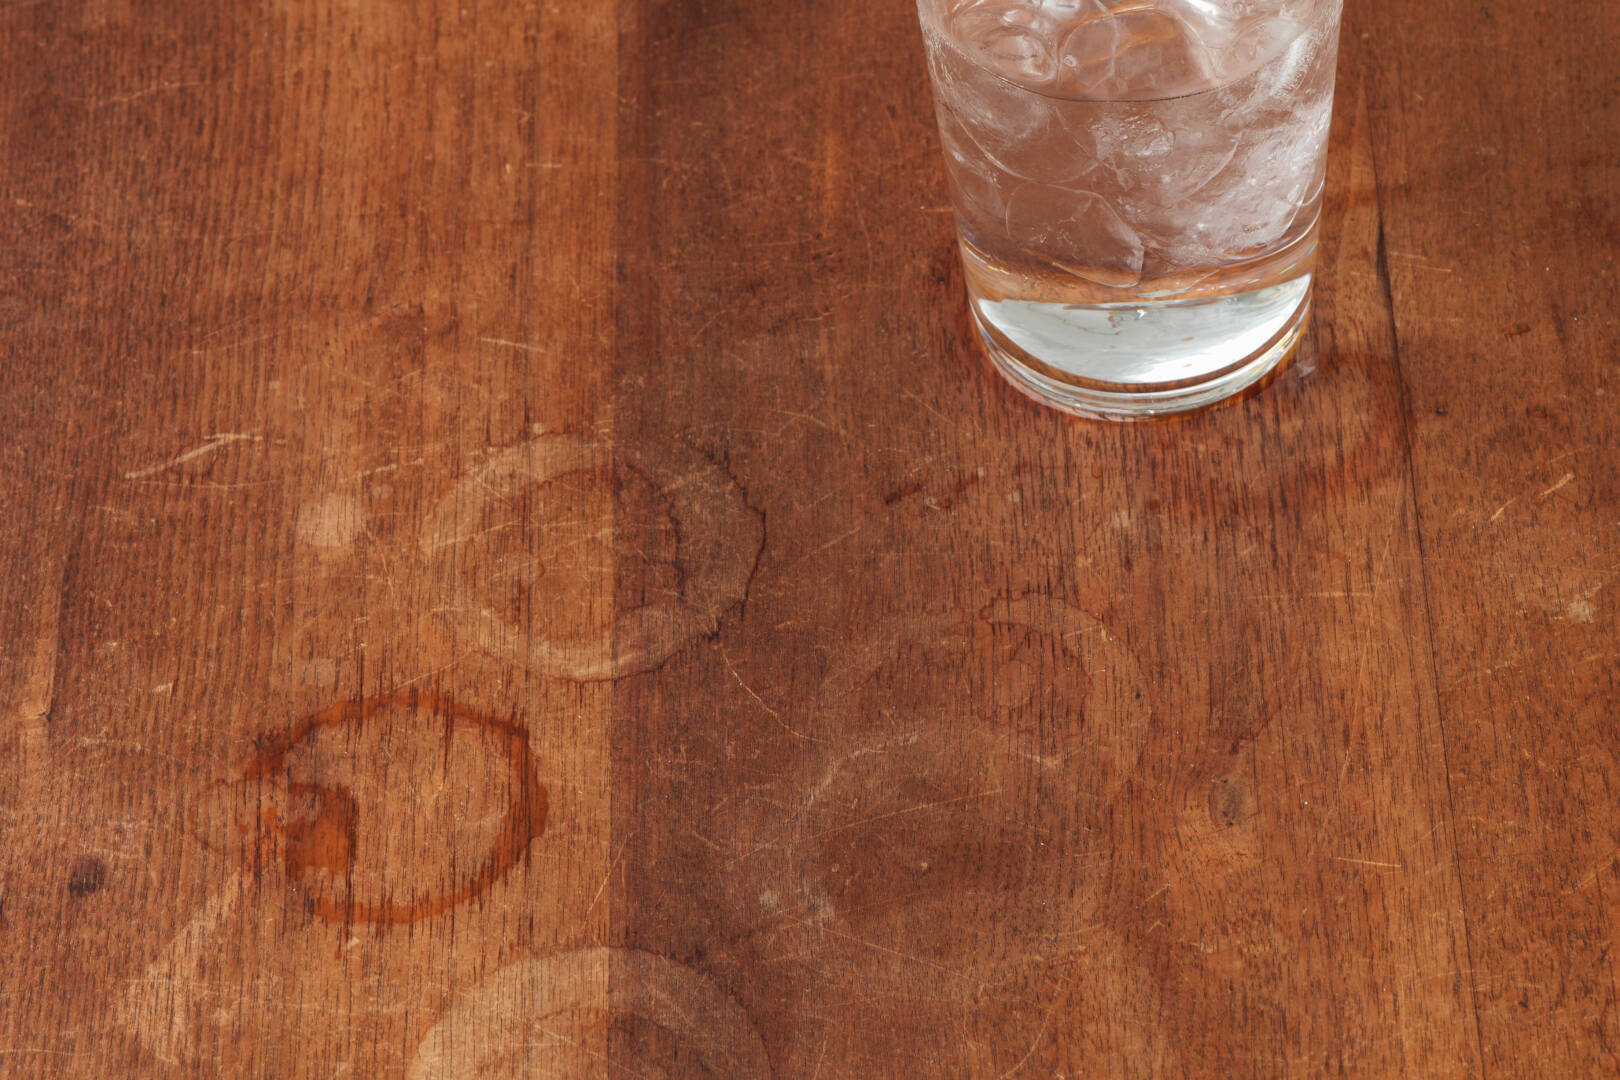 How To Remove Water Stains From Wood Without A Special Cleaner